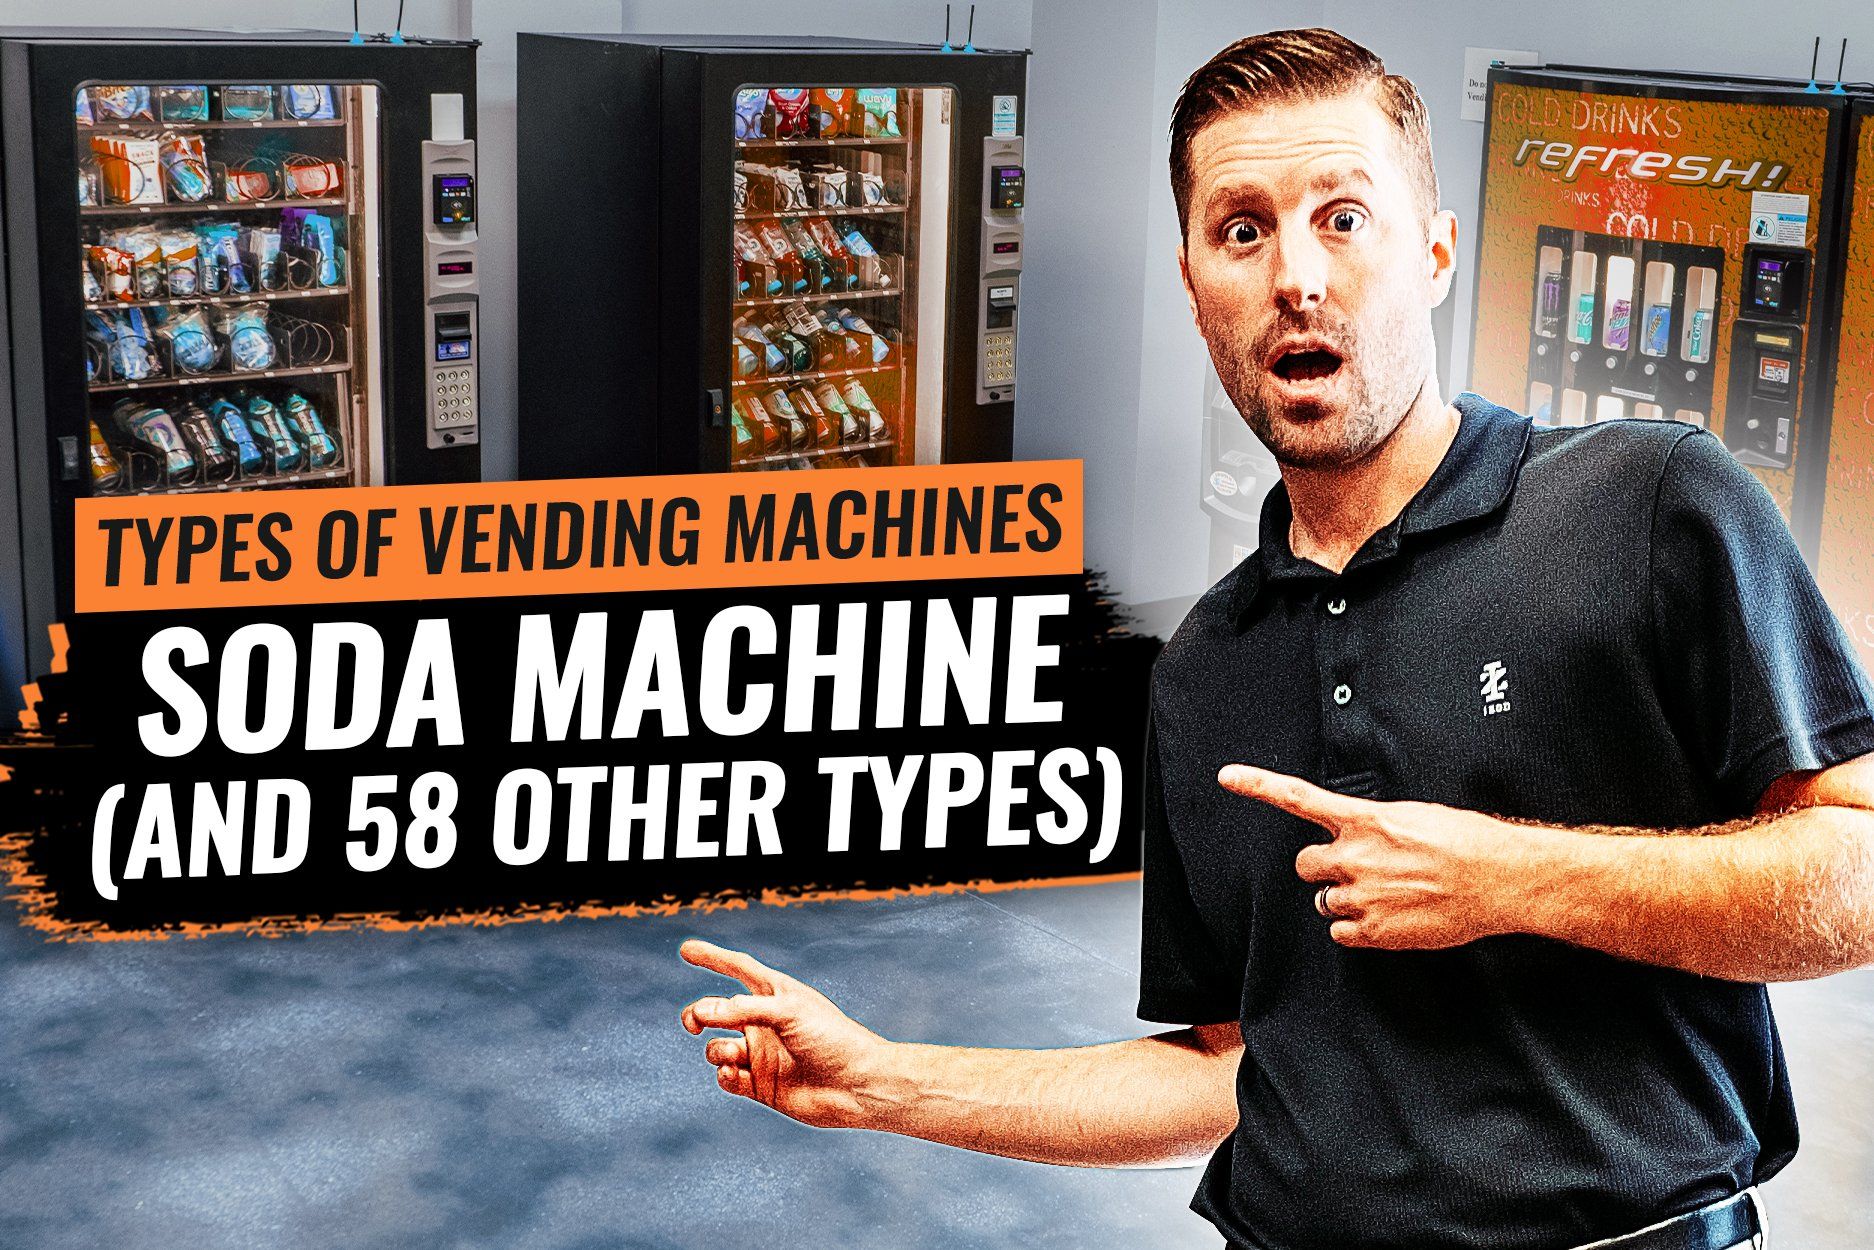 10 Hot Car Wash Vending Machine Items to Sell